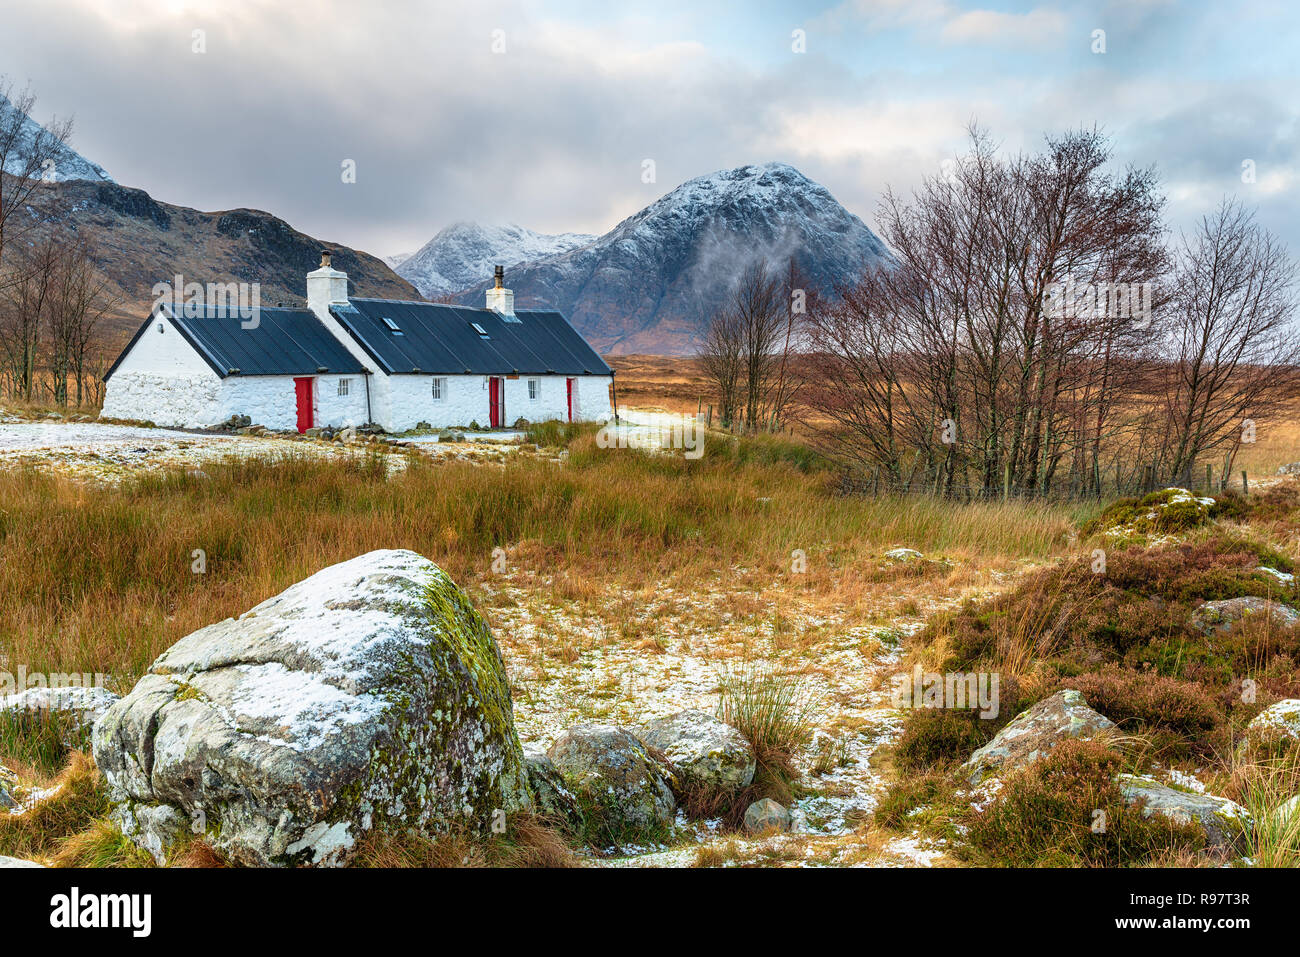 Blackrock cottage after a dusting of snow at Glencoe in the highlands of Scotland Stock Photo